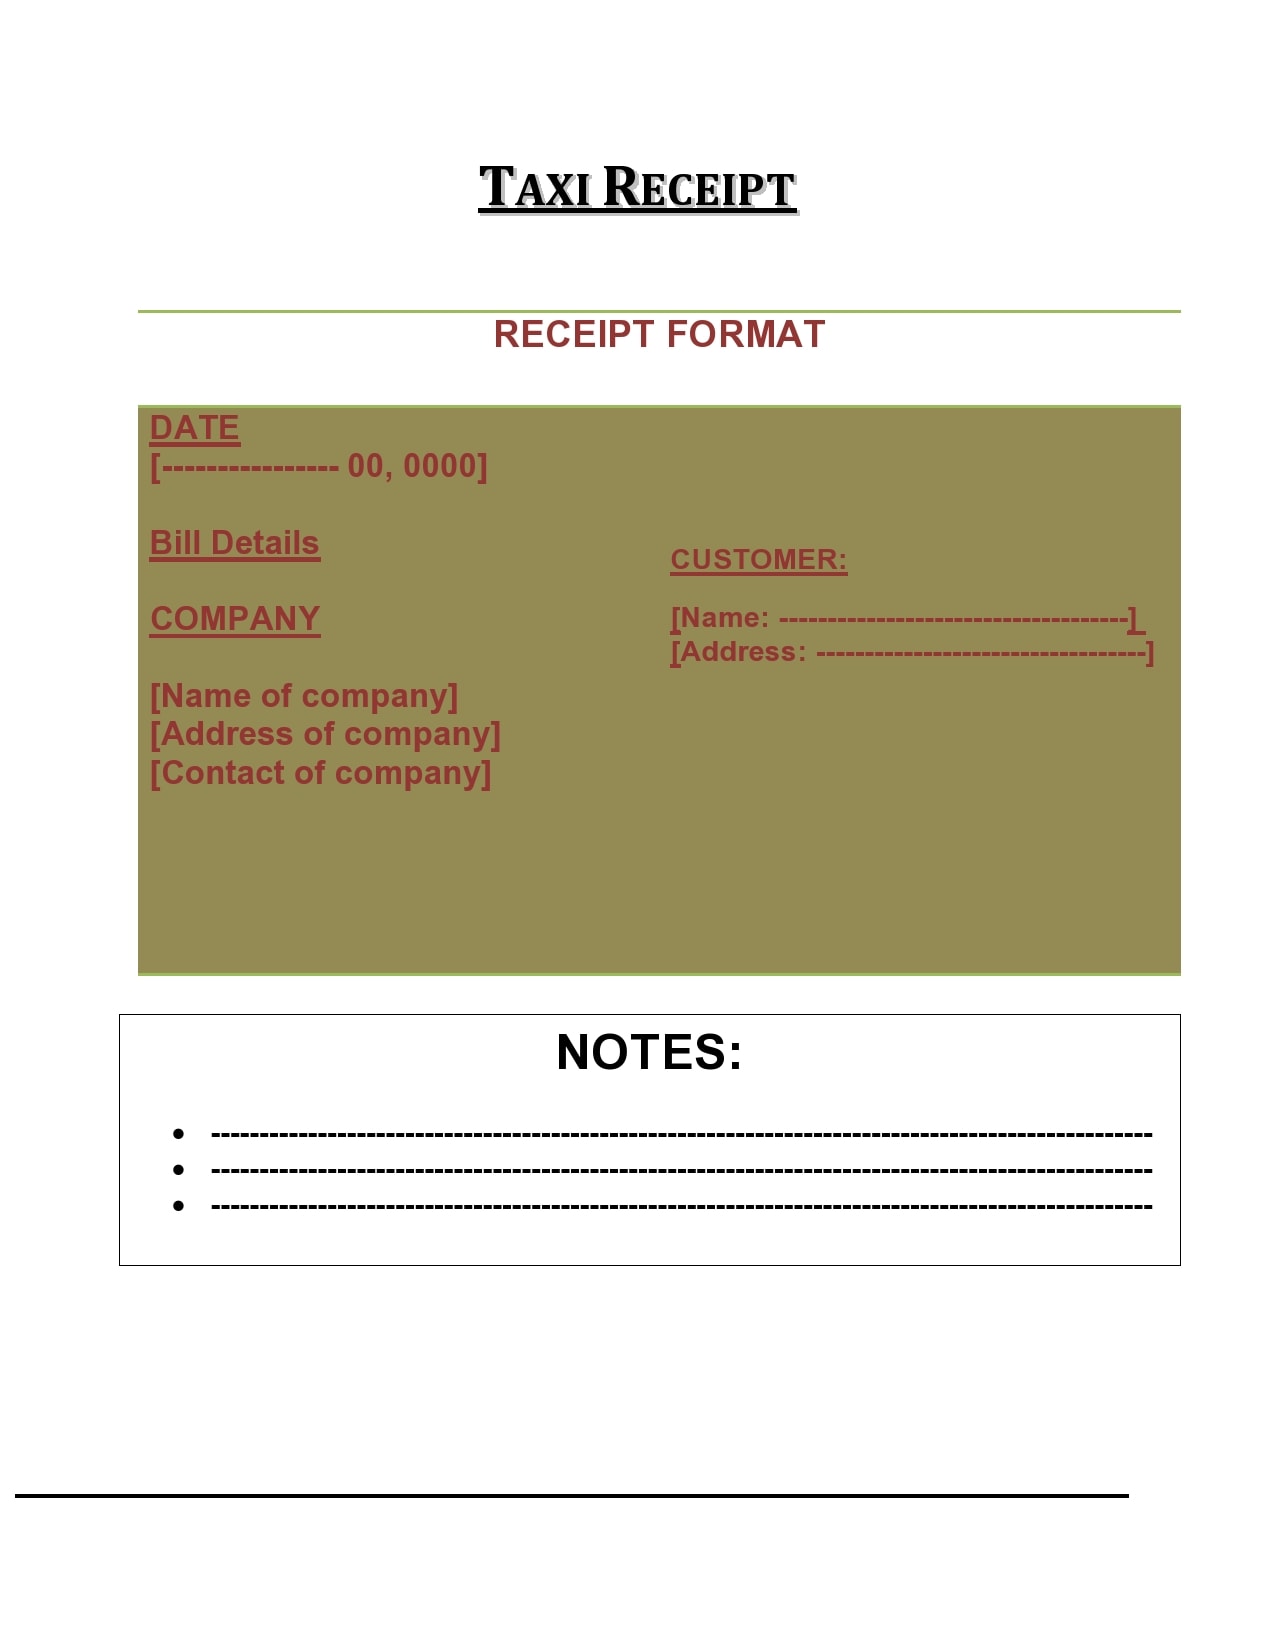 30-blank-taxi-receipt-templates-free-templatearchive